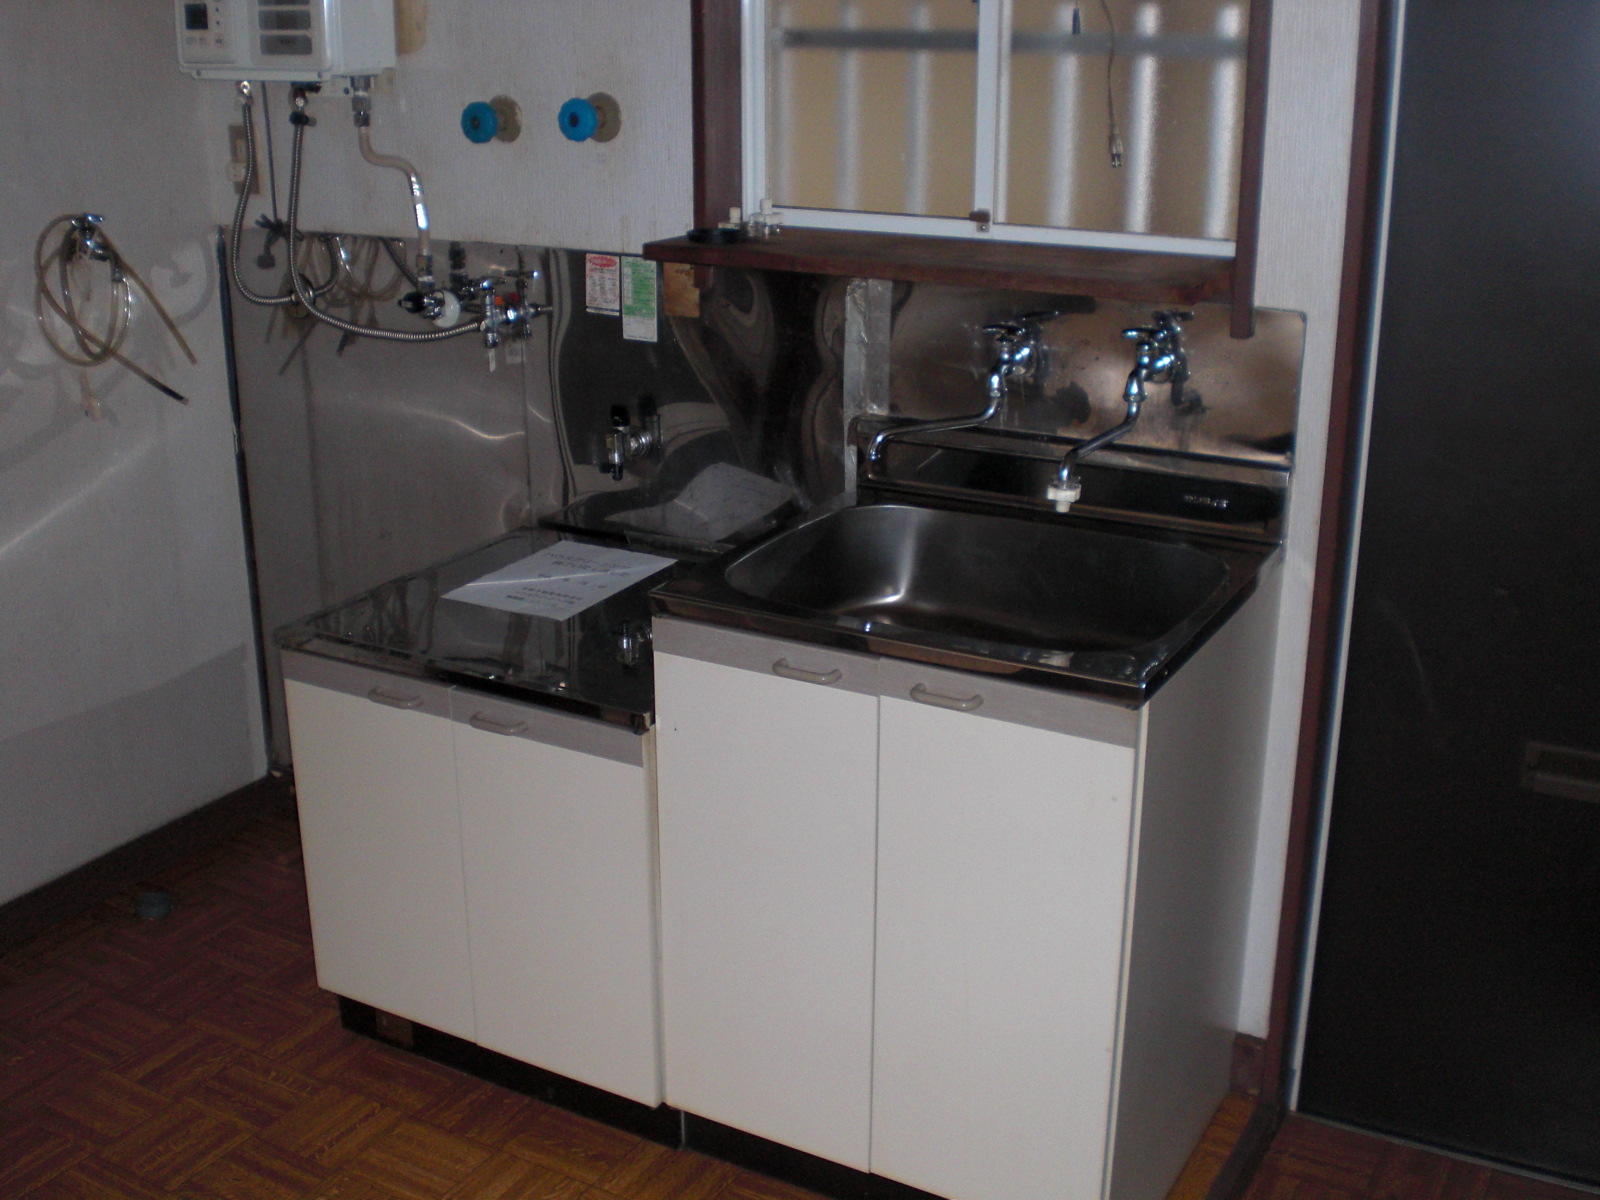 Kitchen. There is a washing machine storage to the left side of the sink